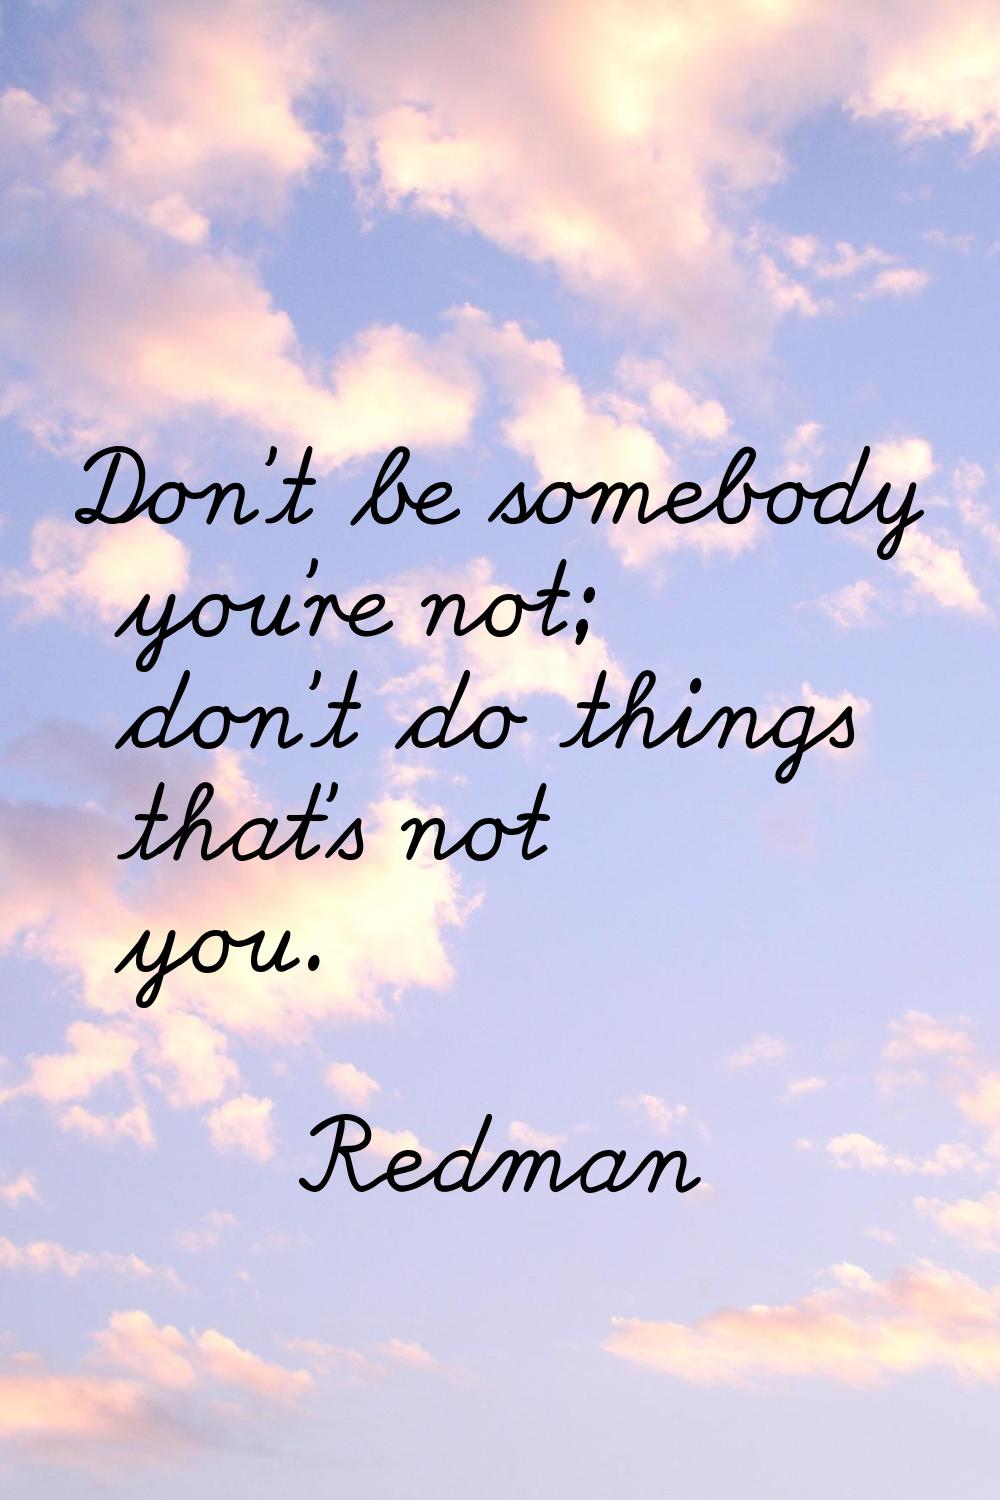 Don't be somebody you're not; don't do things that's not you.